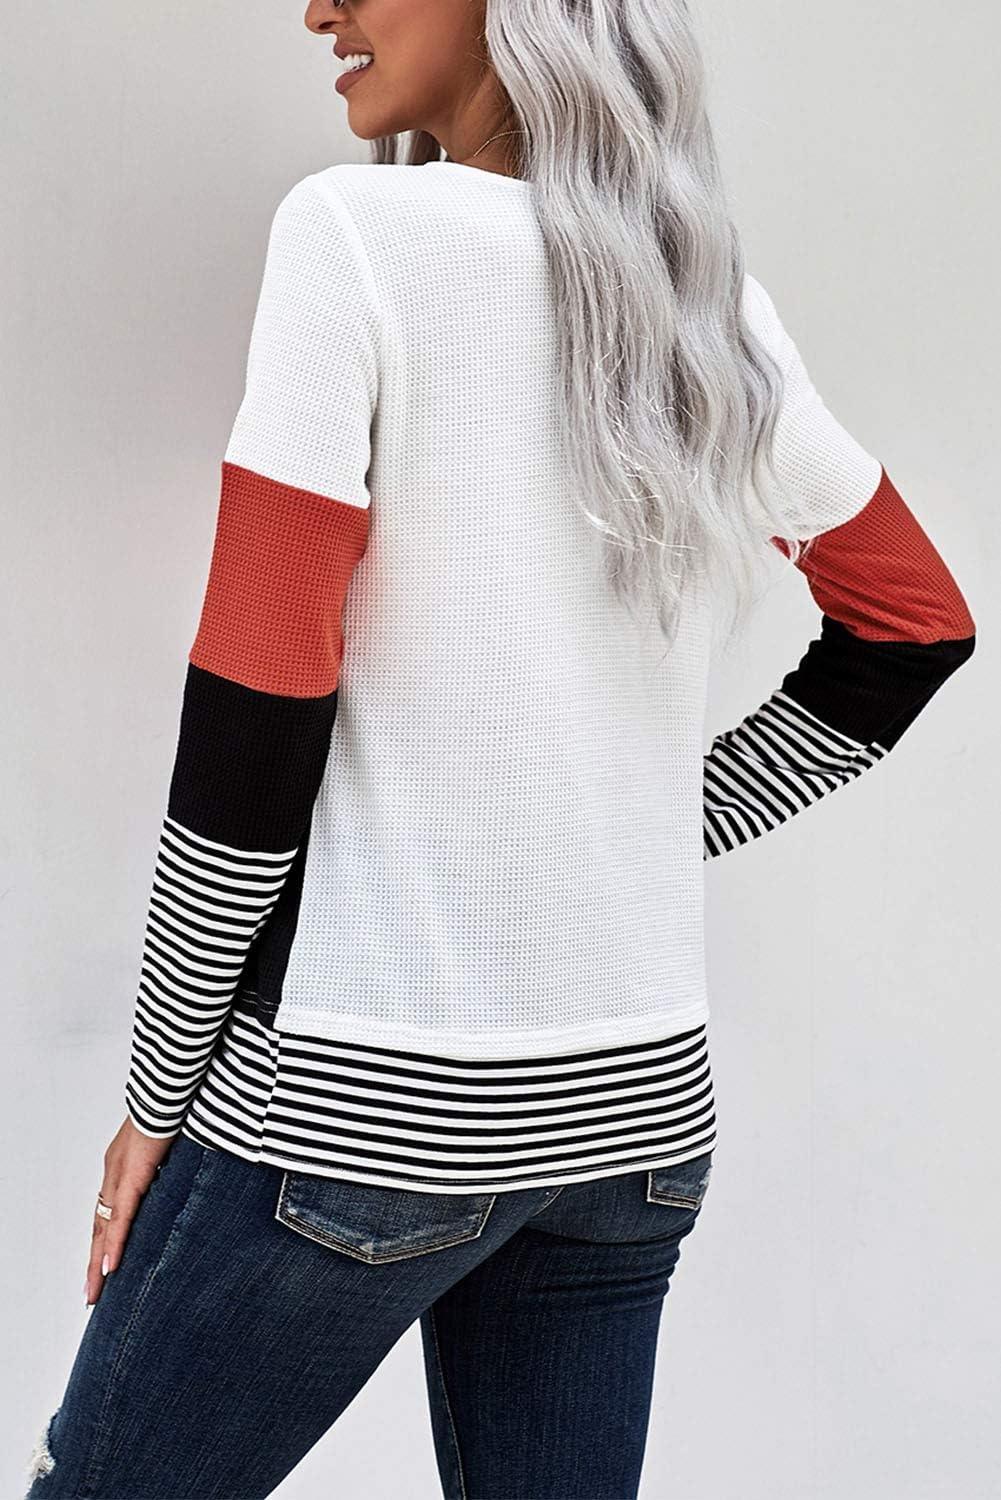 Ladies Long Sleeve Crewneck Striped Pullover Oversized Tunic Tops - Massive Discounts